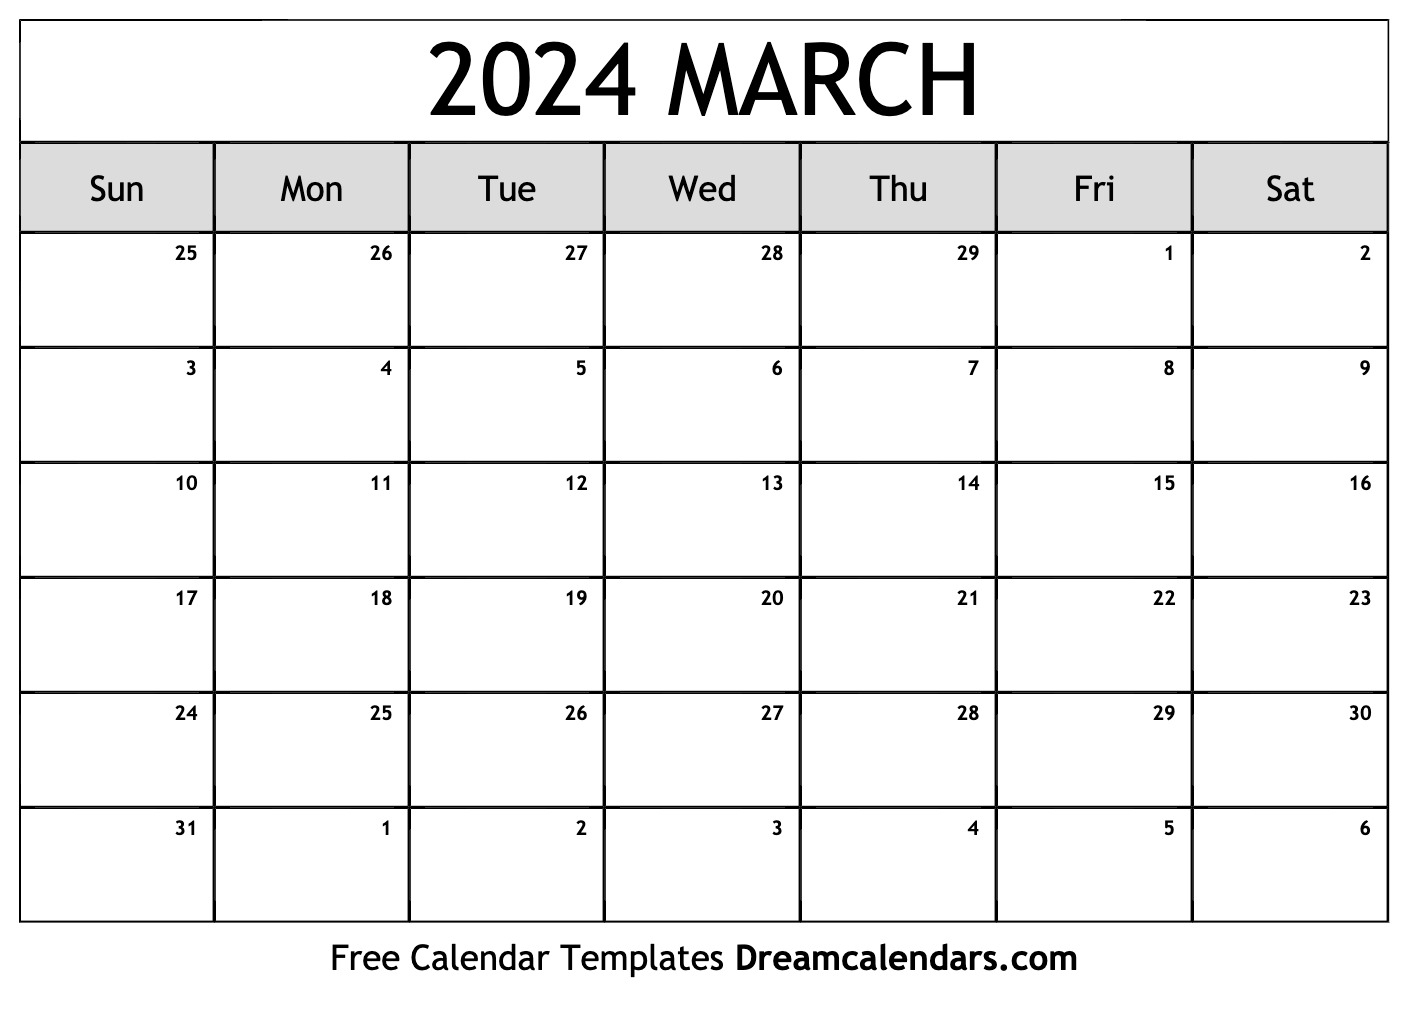 March 2024 Calendar | Free Blank Printable With Holidays for Free Printable 2024 March Calendar